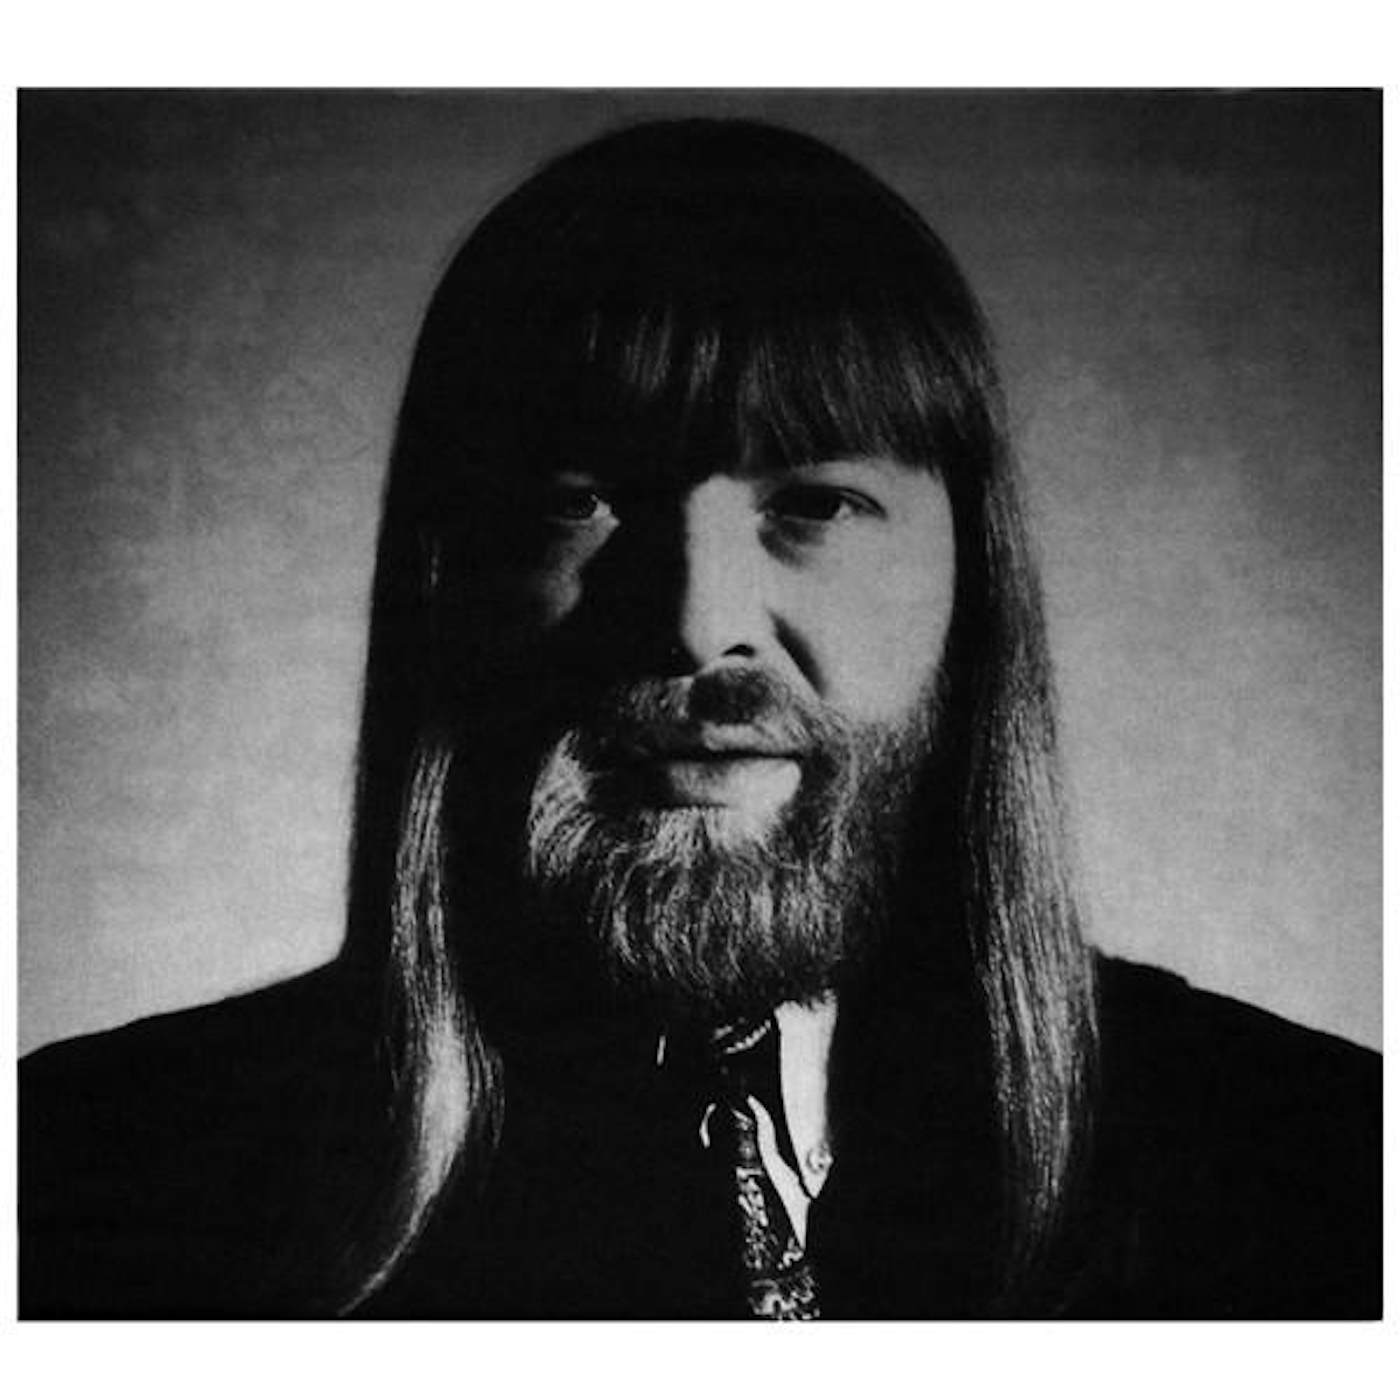 WHO'S THAT MAN: TRIBUTE TO CONNY PLANK Vinyl Record - 180 Gram Pressing